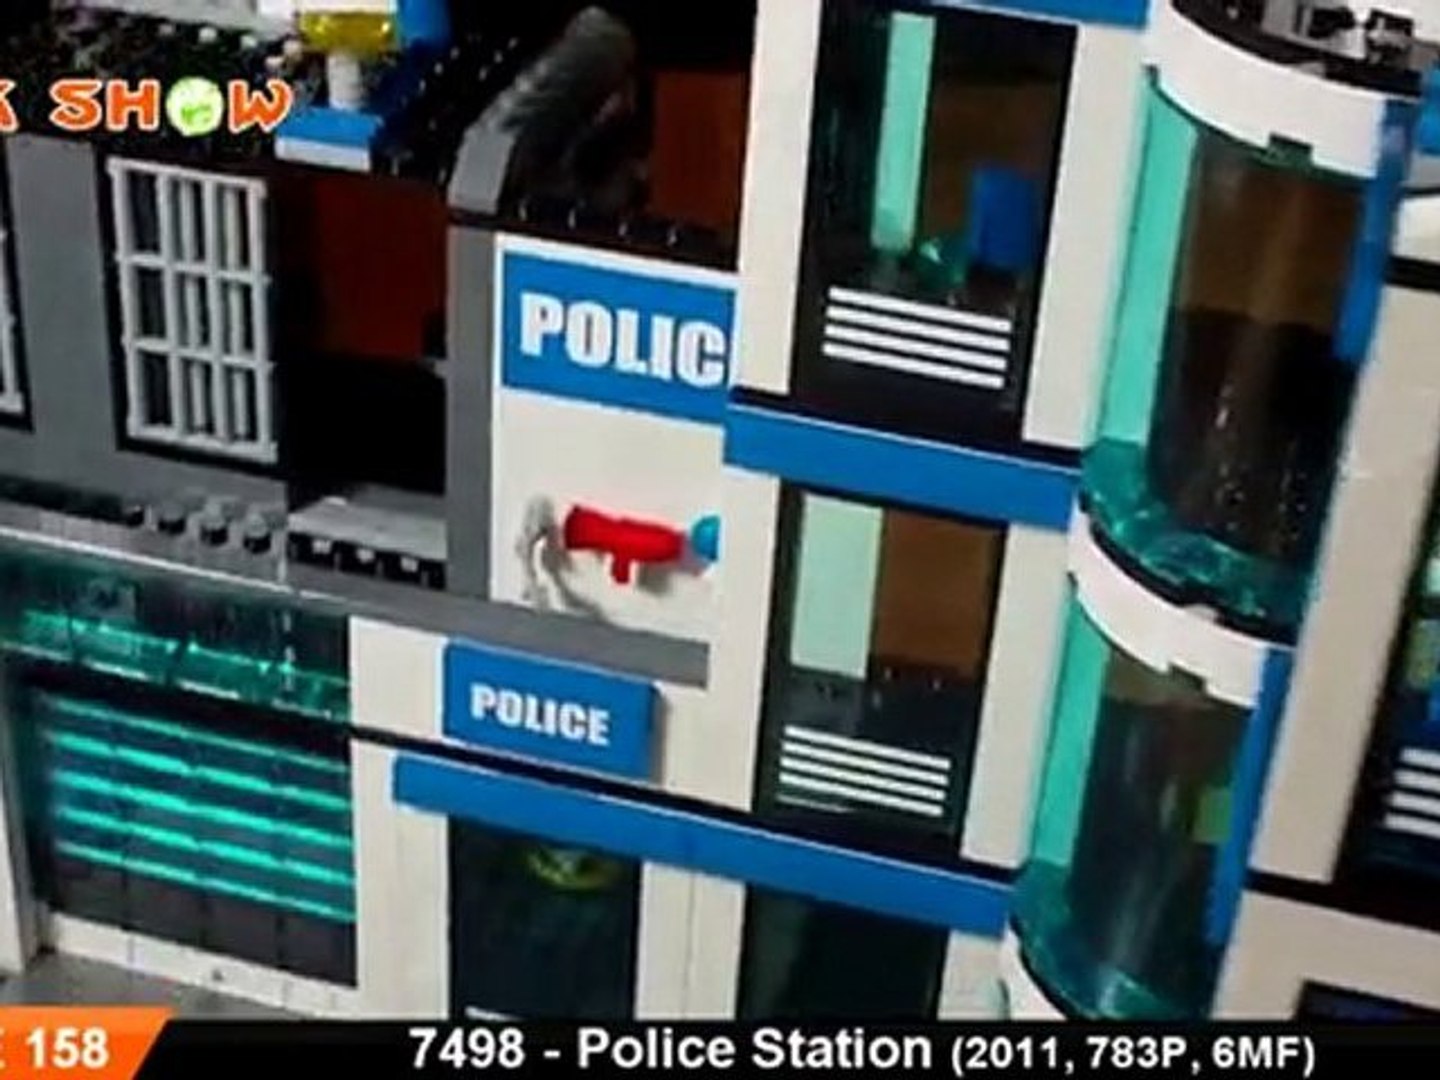 LEGO City Police Station Review : LEGO 7498